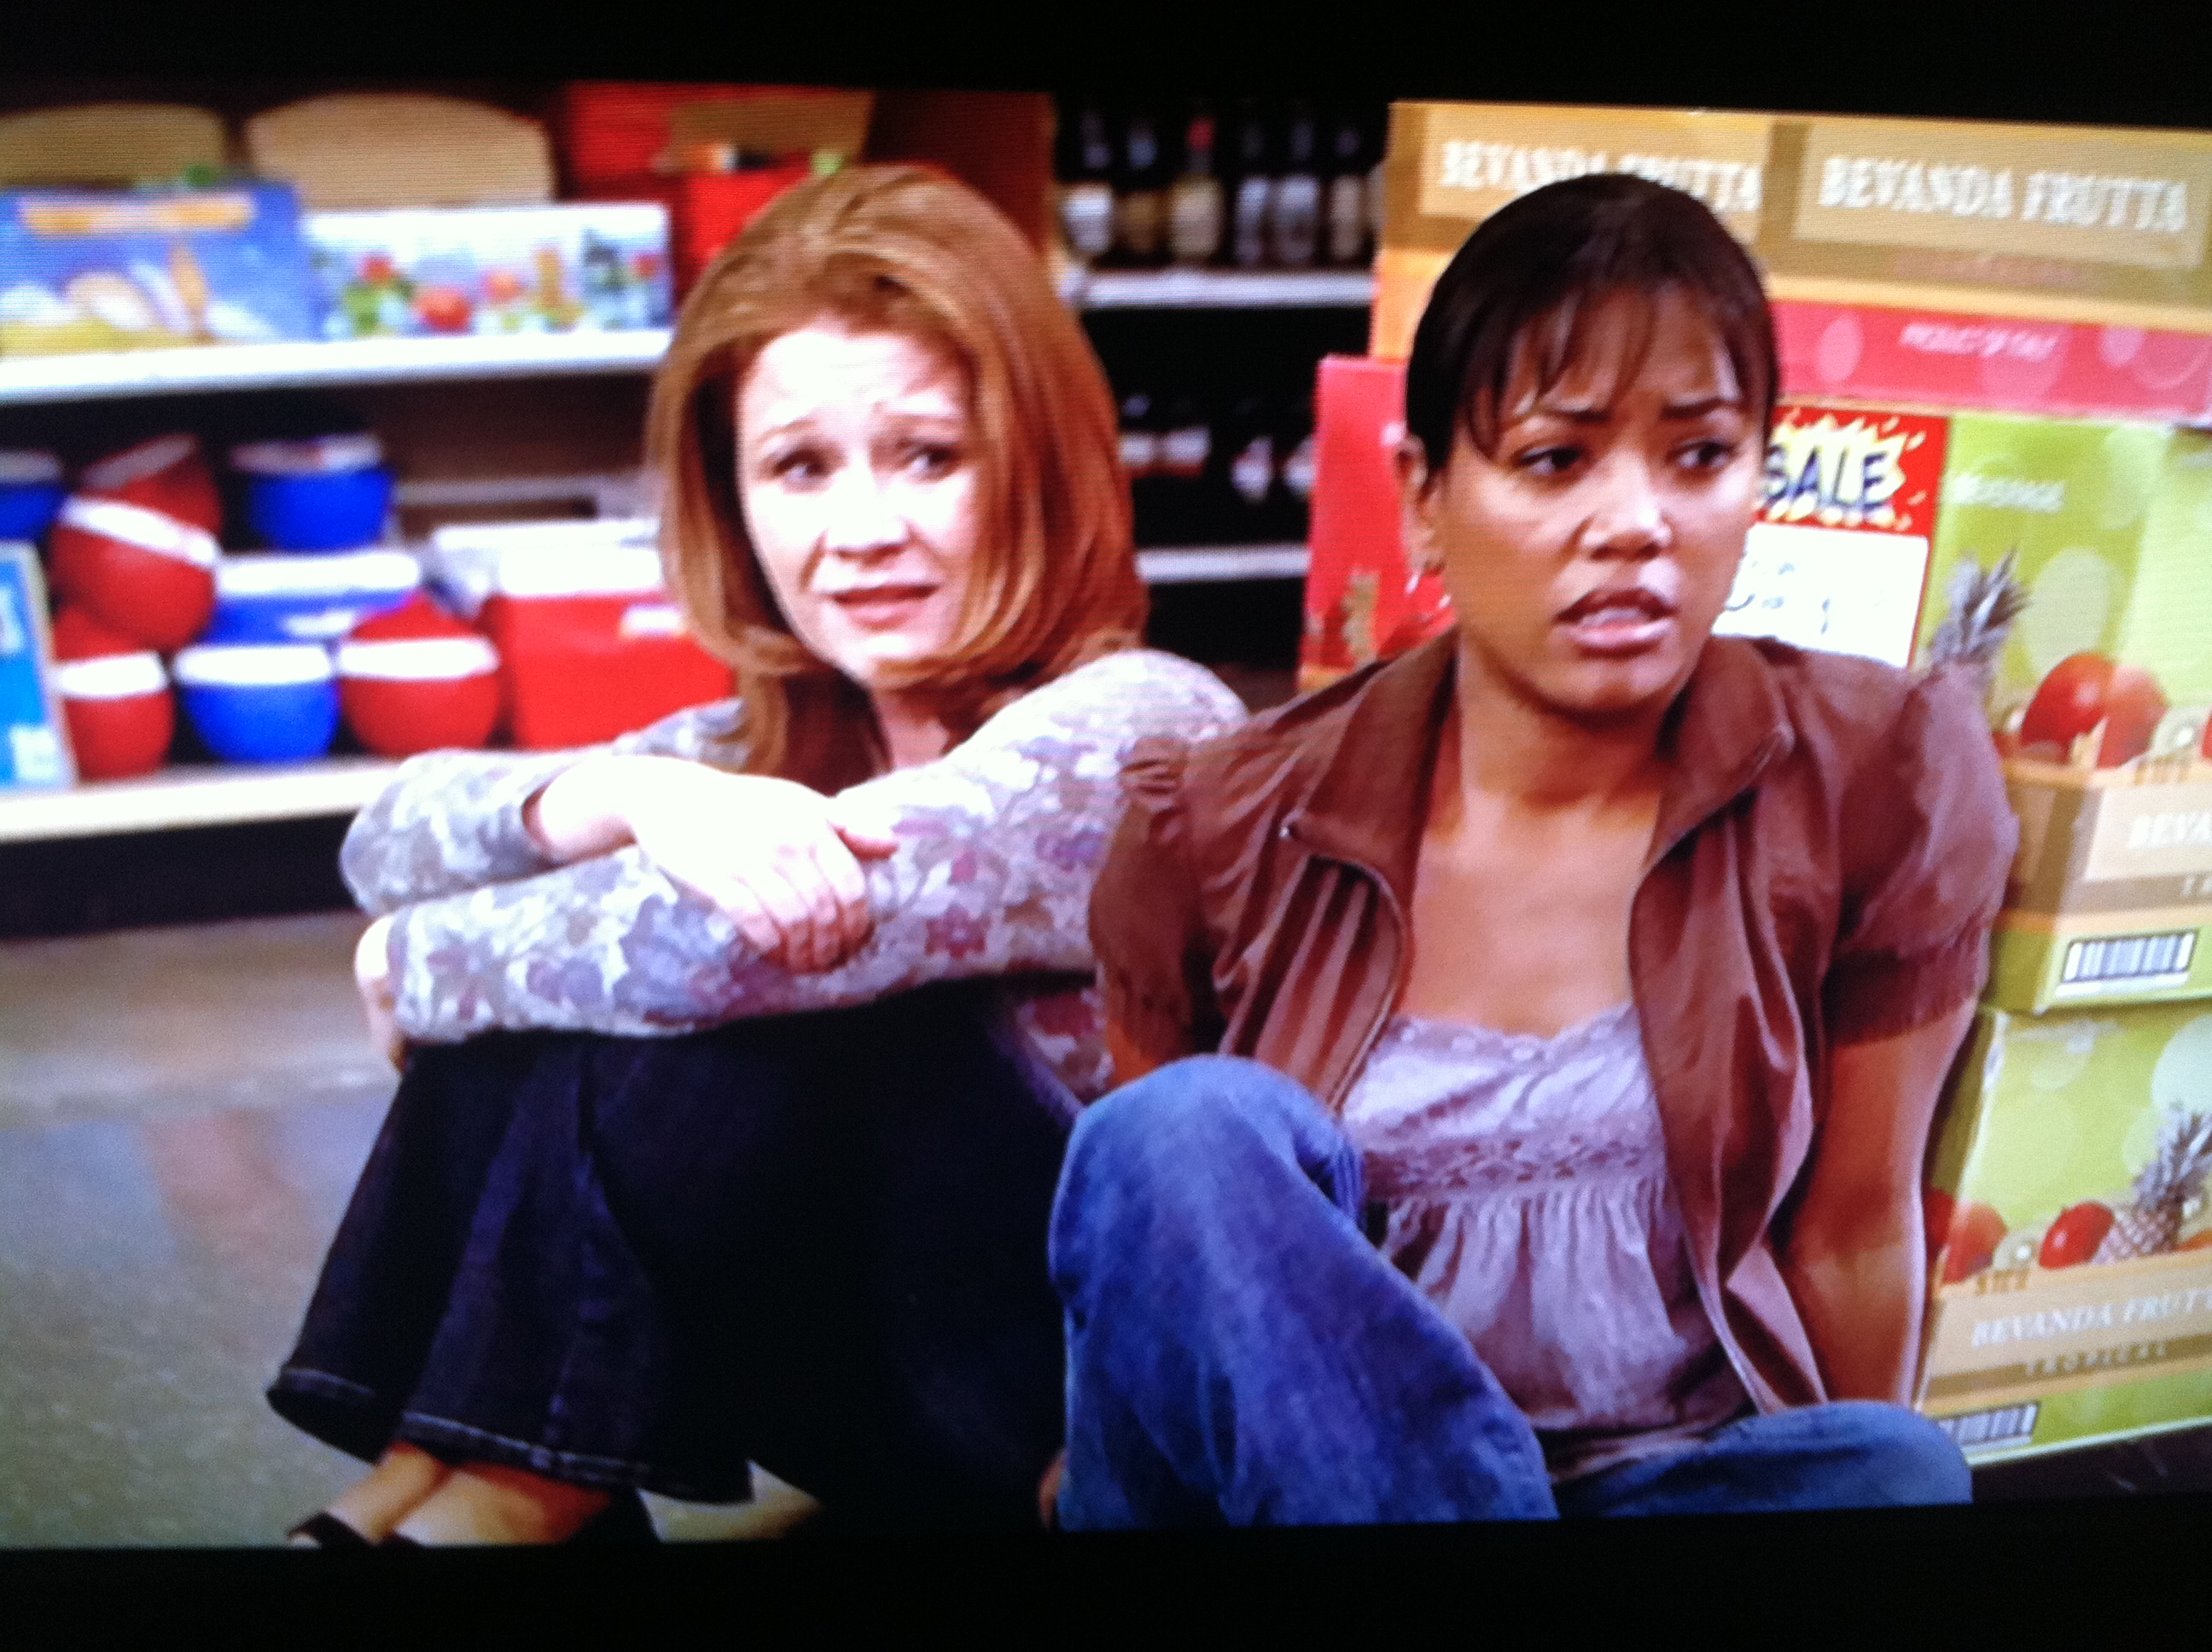 Episode on ABC's Private Practice.